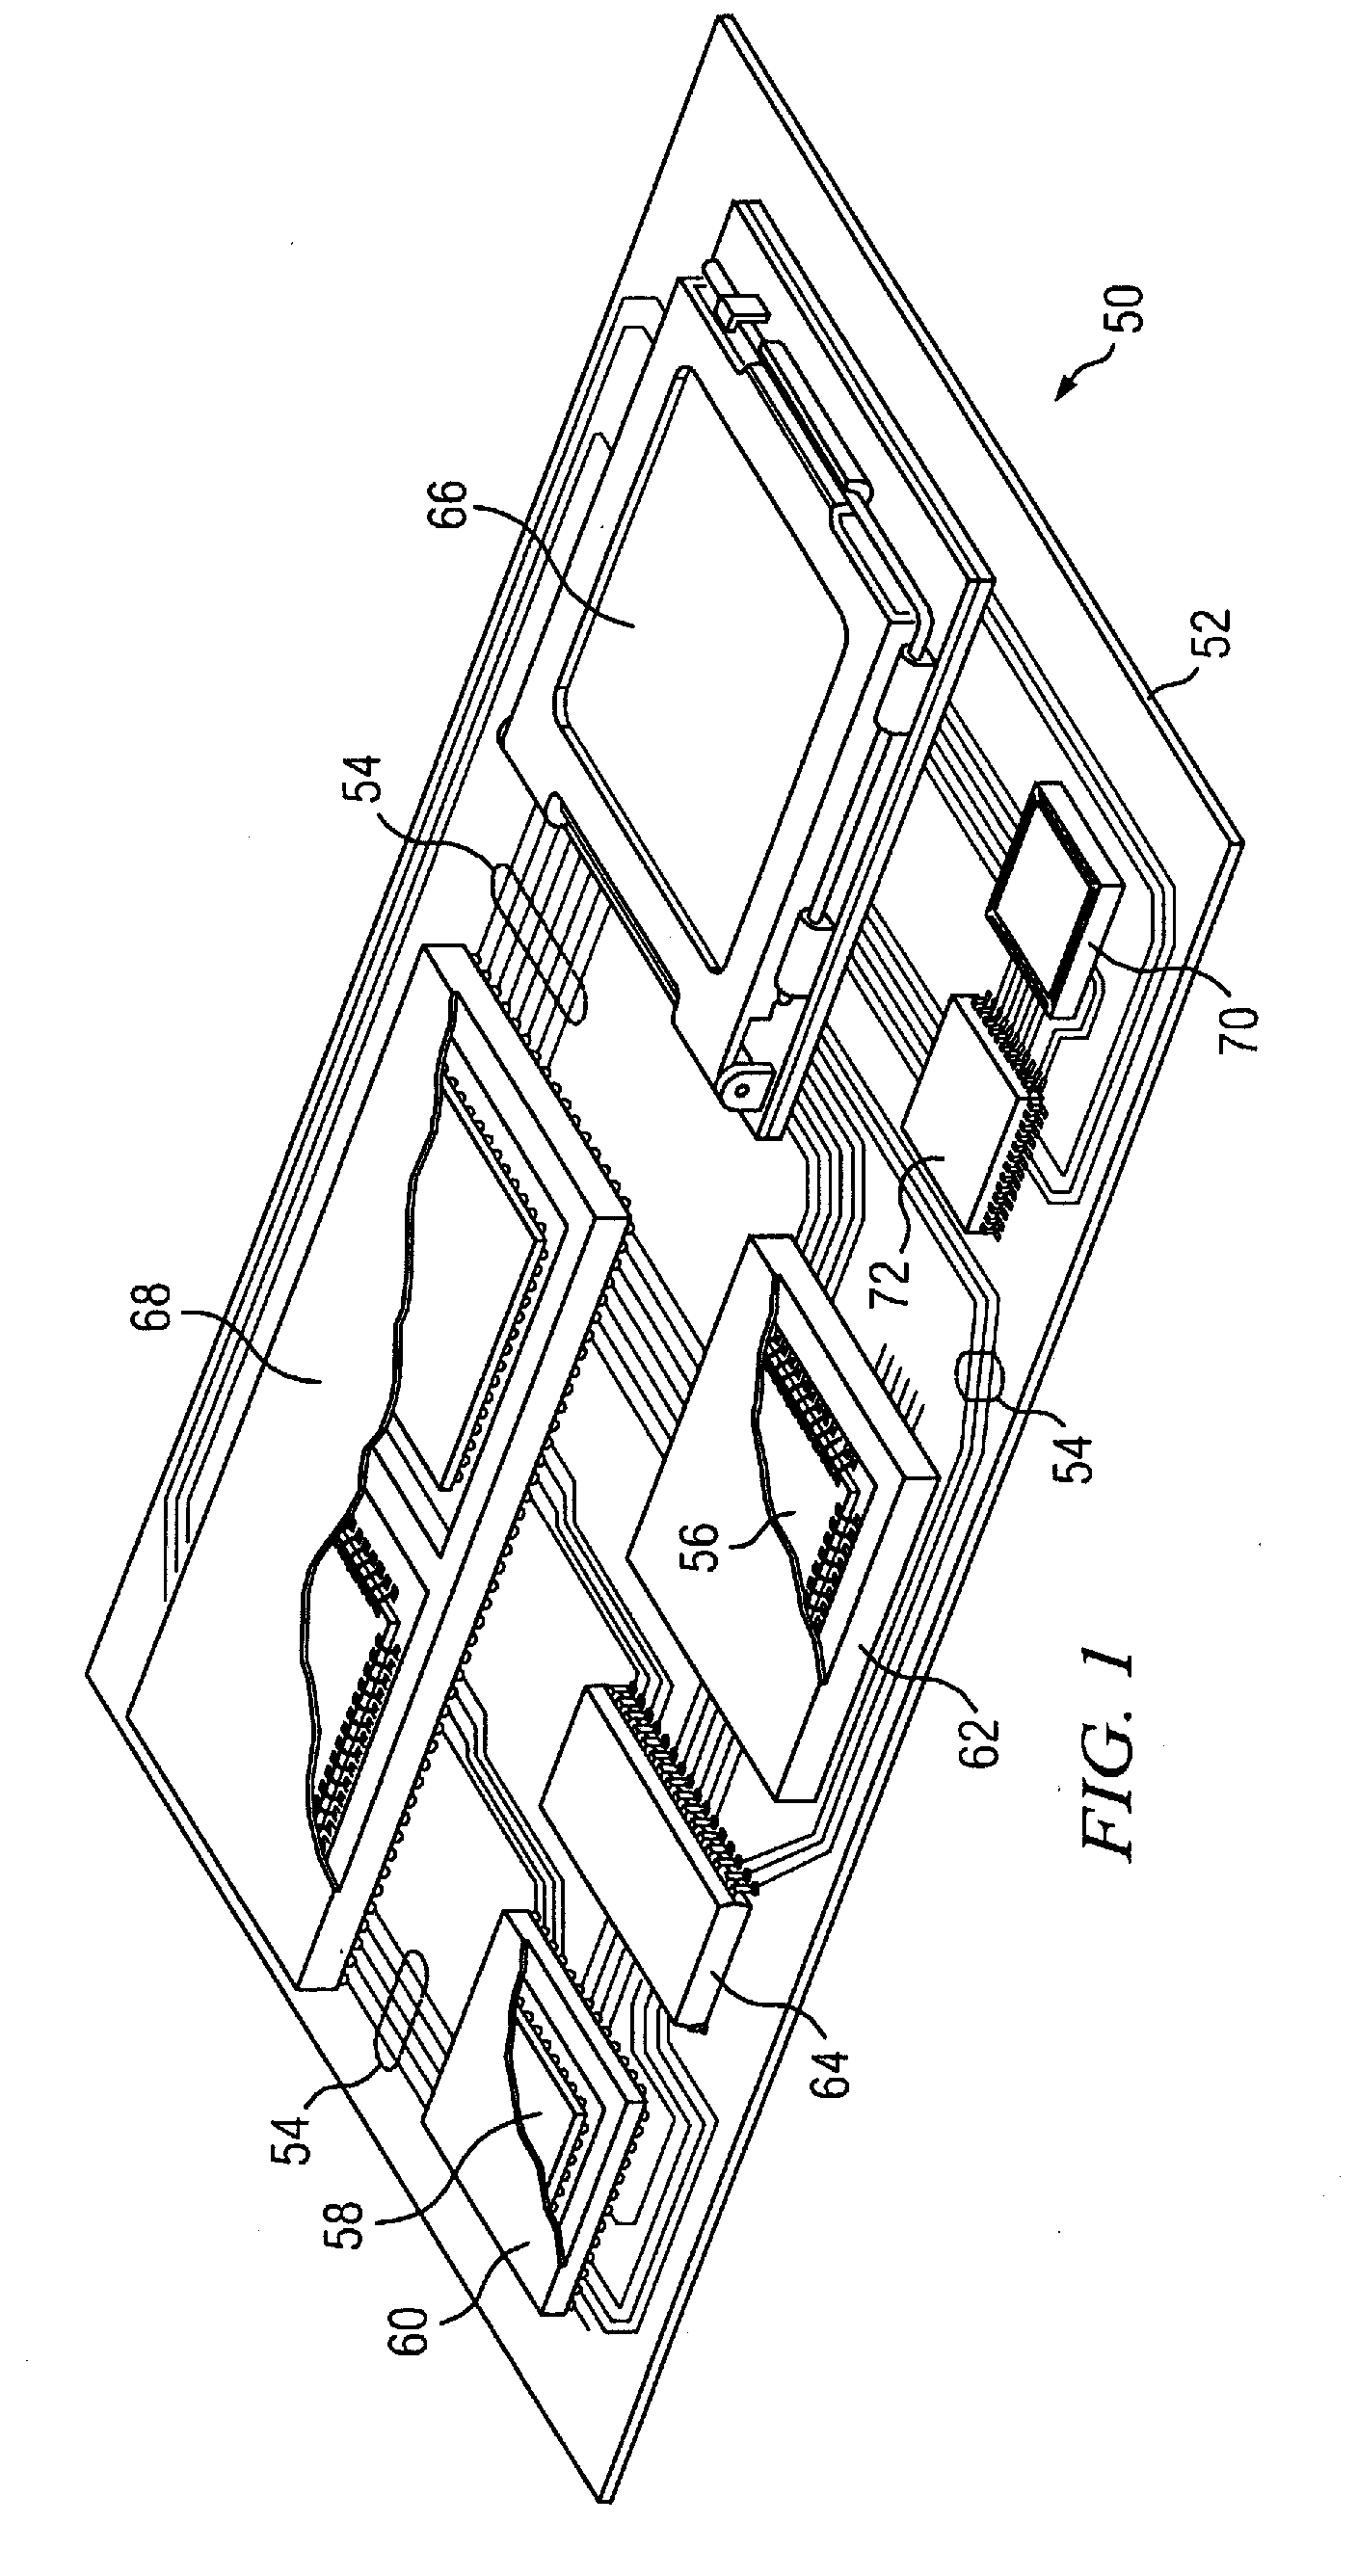 Semiconductor Device and Method of Dual-Molding Die Formed on Opposite Sides of Build-Up Interconnect Structures